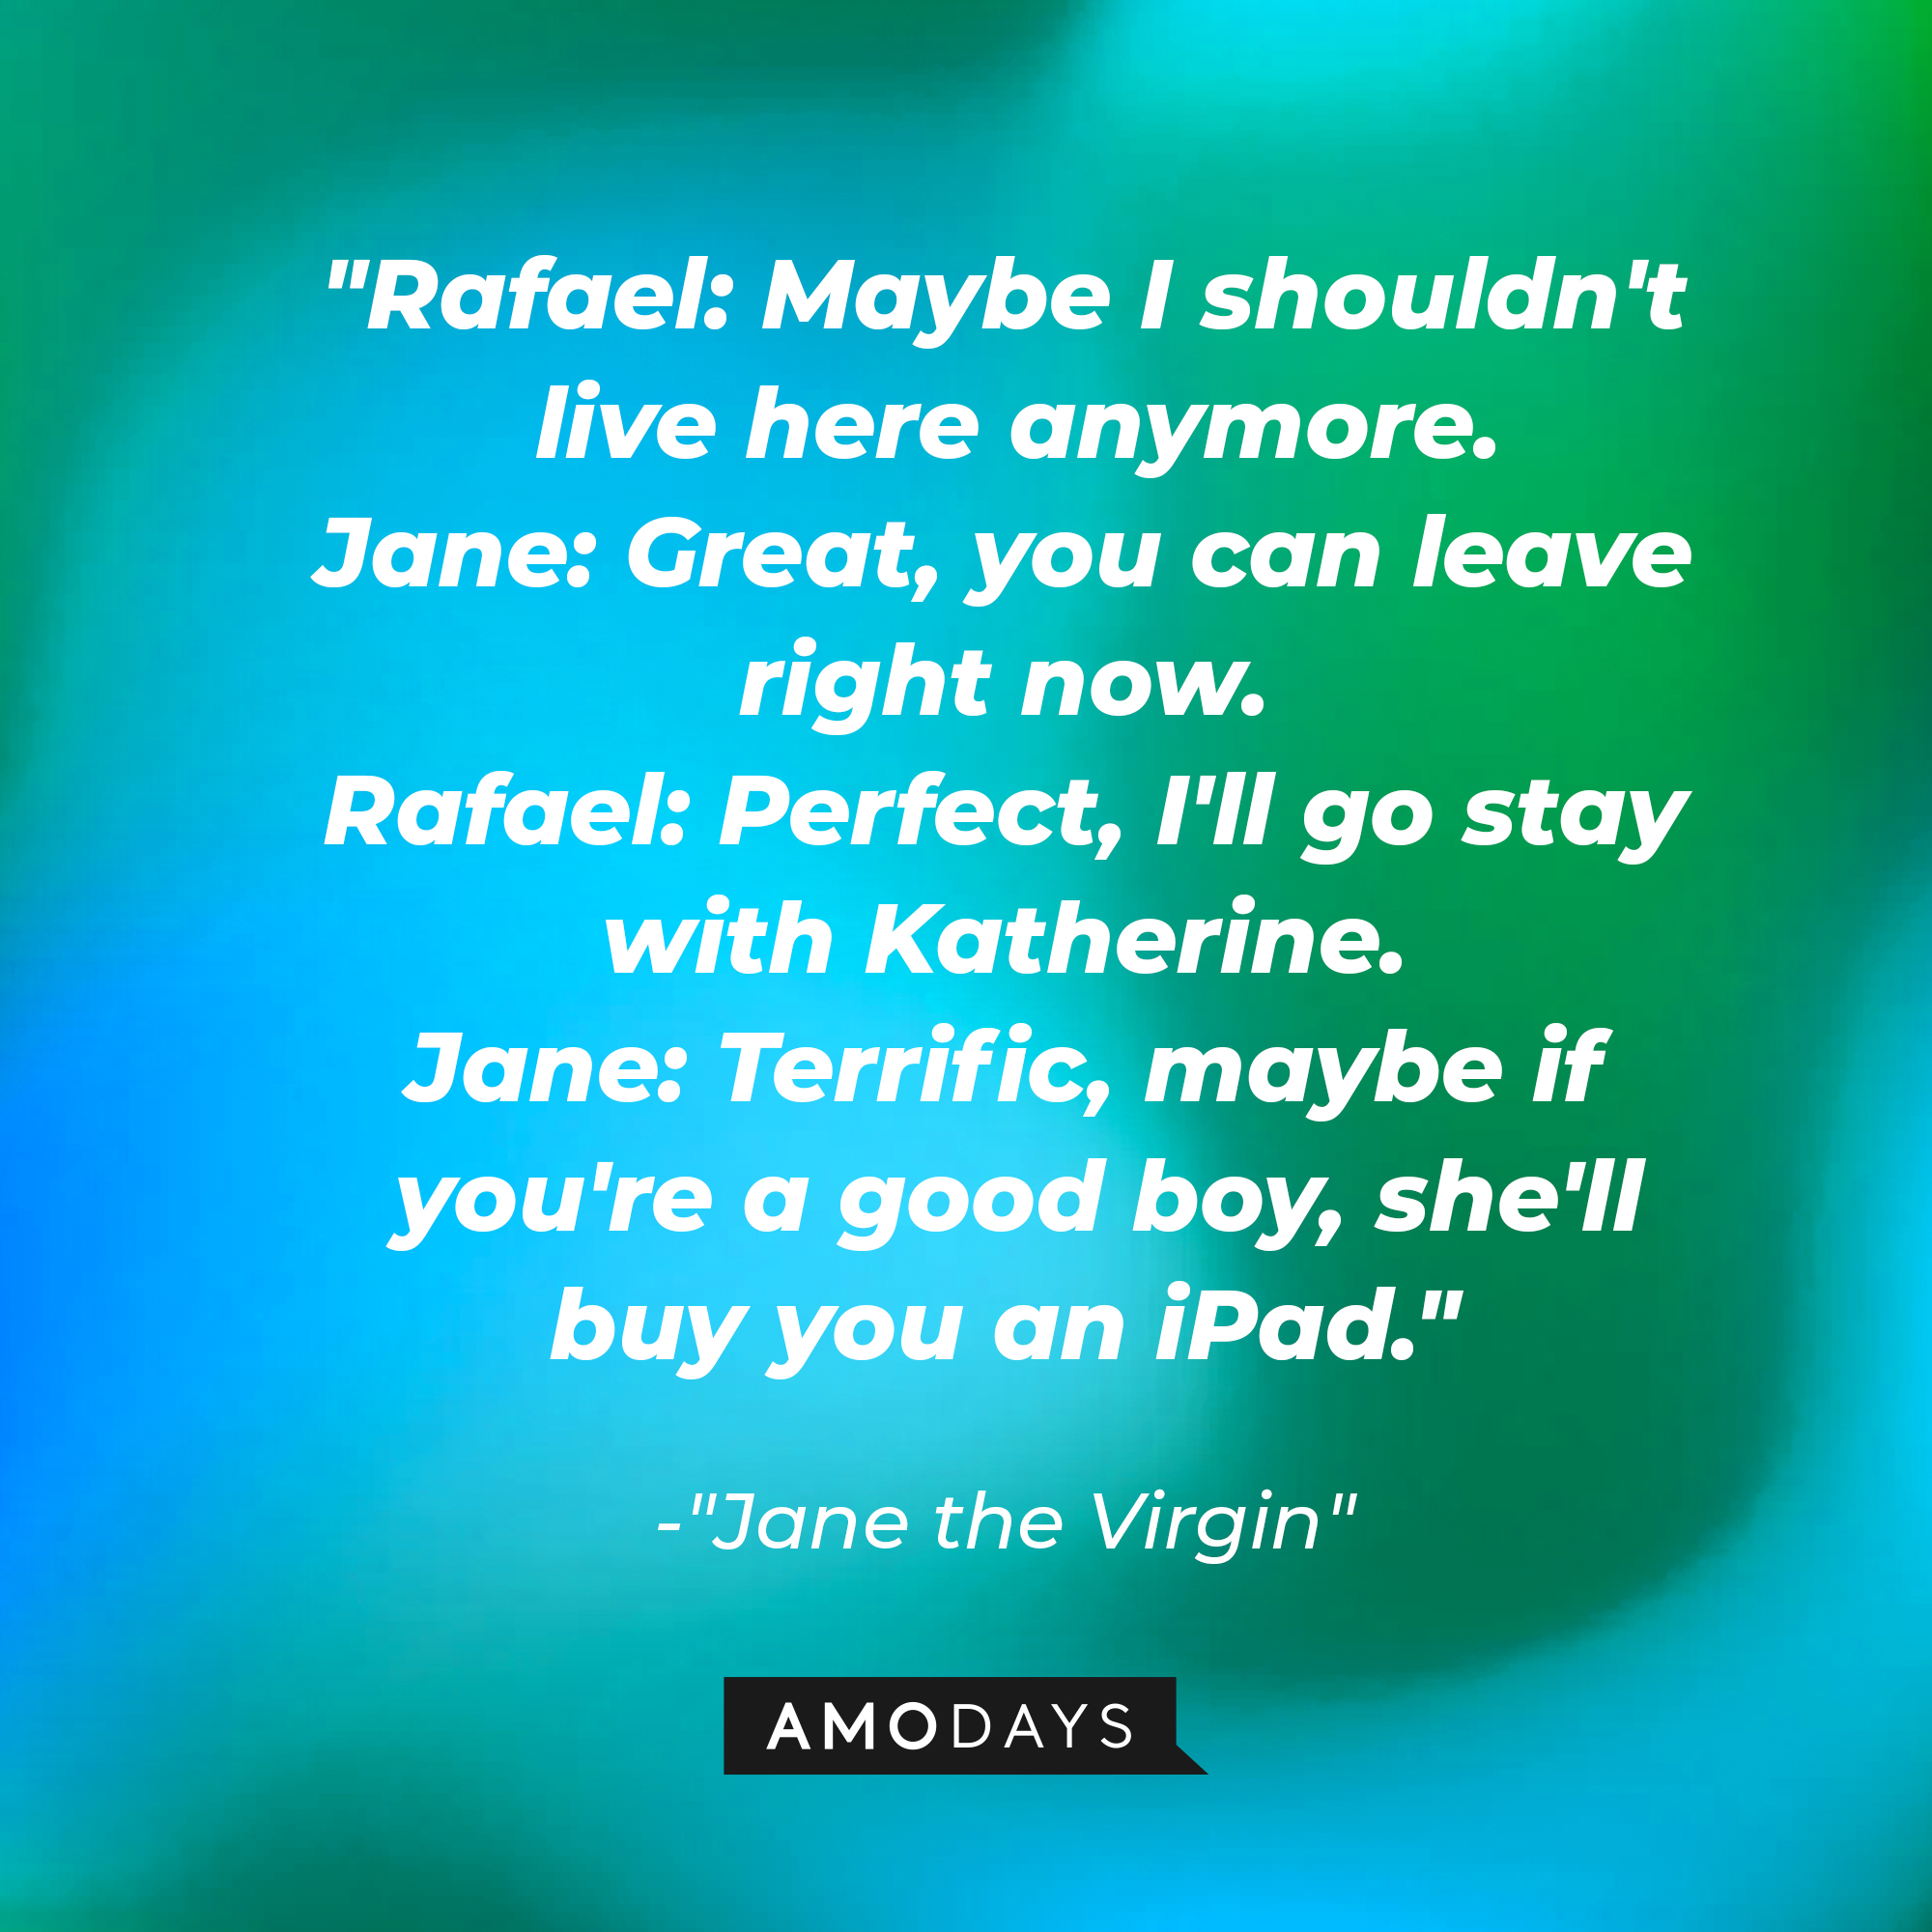 Jane Villanueva's dialogue in "Jane the Virgin:" "Rafael: Maybe I shouldn't live here anymore; Jane: Great, you can leave right now. Rafael: Perfect, I'll go stay with Katherine. Jane: Terrific, maybe if you're a good boy, she'll buy you an iPad." | Source: Amodays